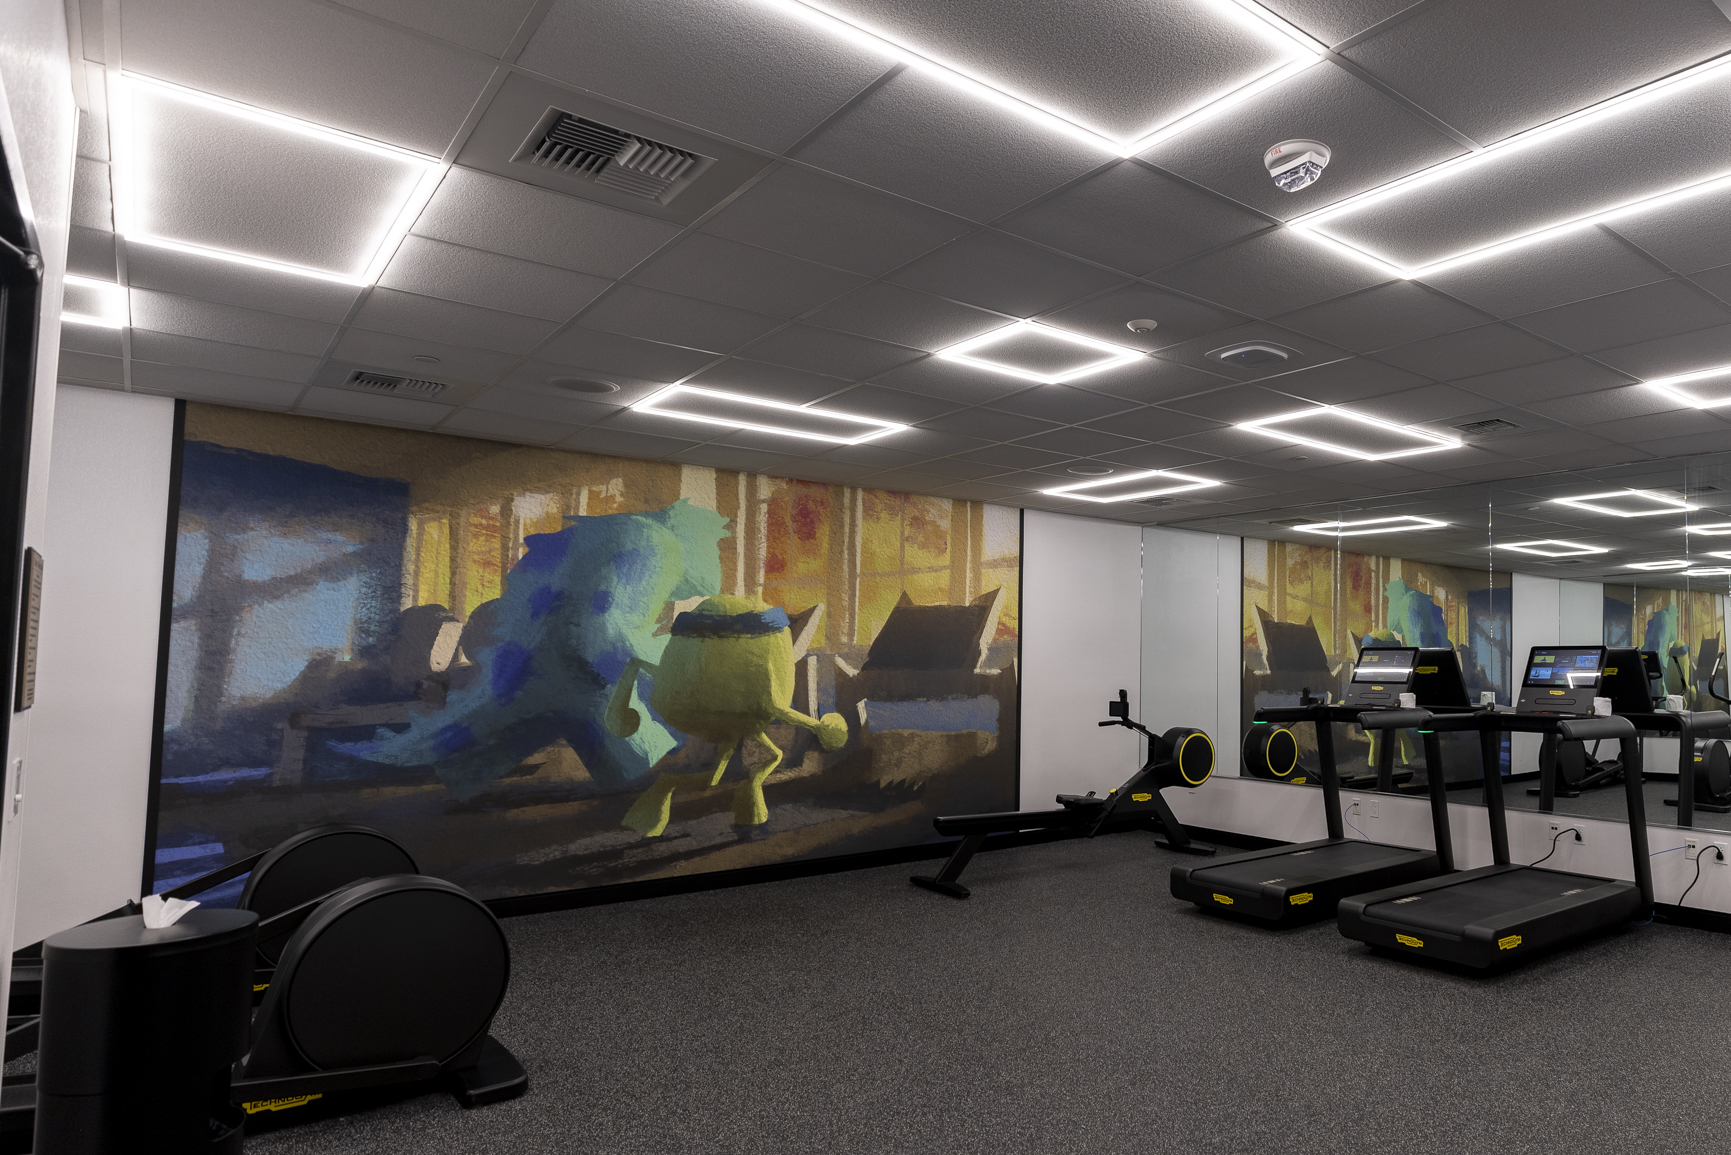 Hotel guests can enjoy a new and expanded fitness center featuring a mural of Mike and Sulley from “Monster’s University” running on a treadmill, inspired by Pixar’s “Monsters University.” (Christian Thompson/Disneyland Resort)